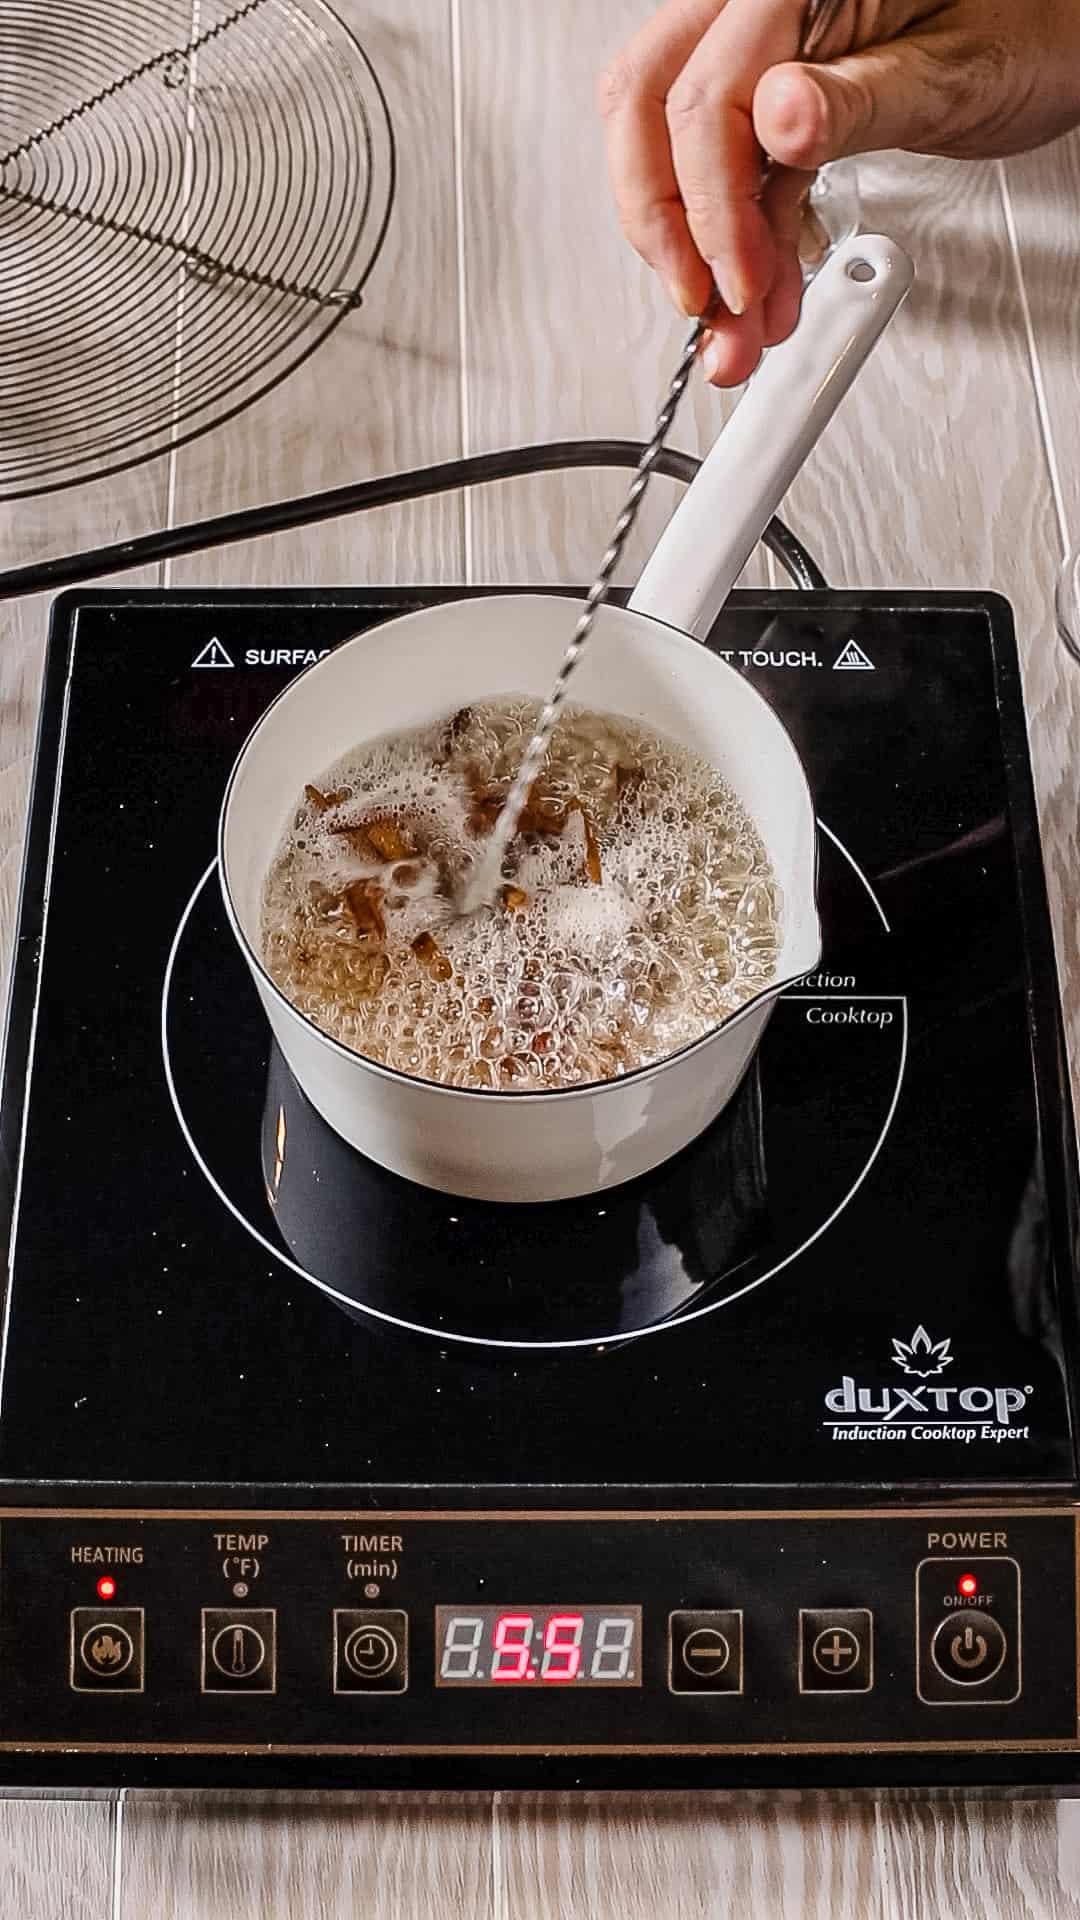 Overhead view of a white saucepan on an induction burner. The liquid is bubbling up.